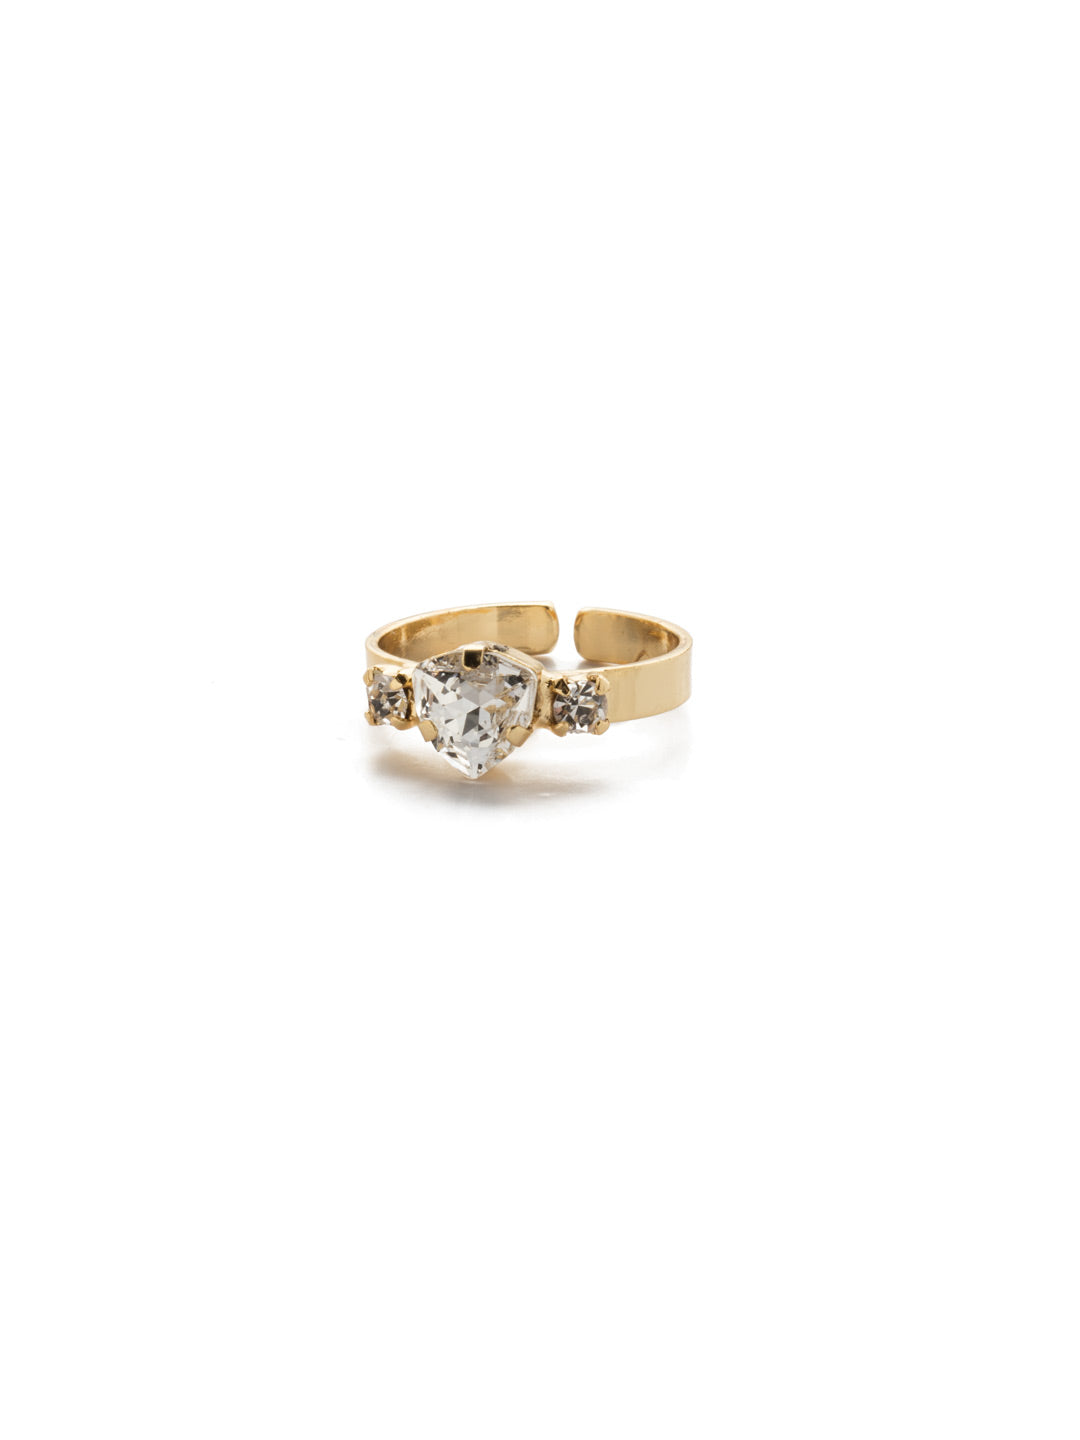 Paulina Band Ring - 4REP20BGCRY - <p>The Paulina Adjustable Band Ring showcases a stunning center antique triangle crystal flanked by two petite sparklers for added effect. From Sorrelli's Crystal collection in our Bright Gold-tone finish.</p>